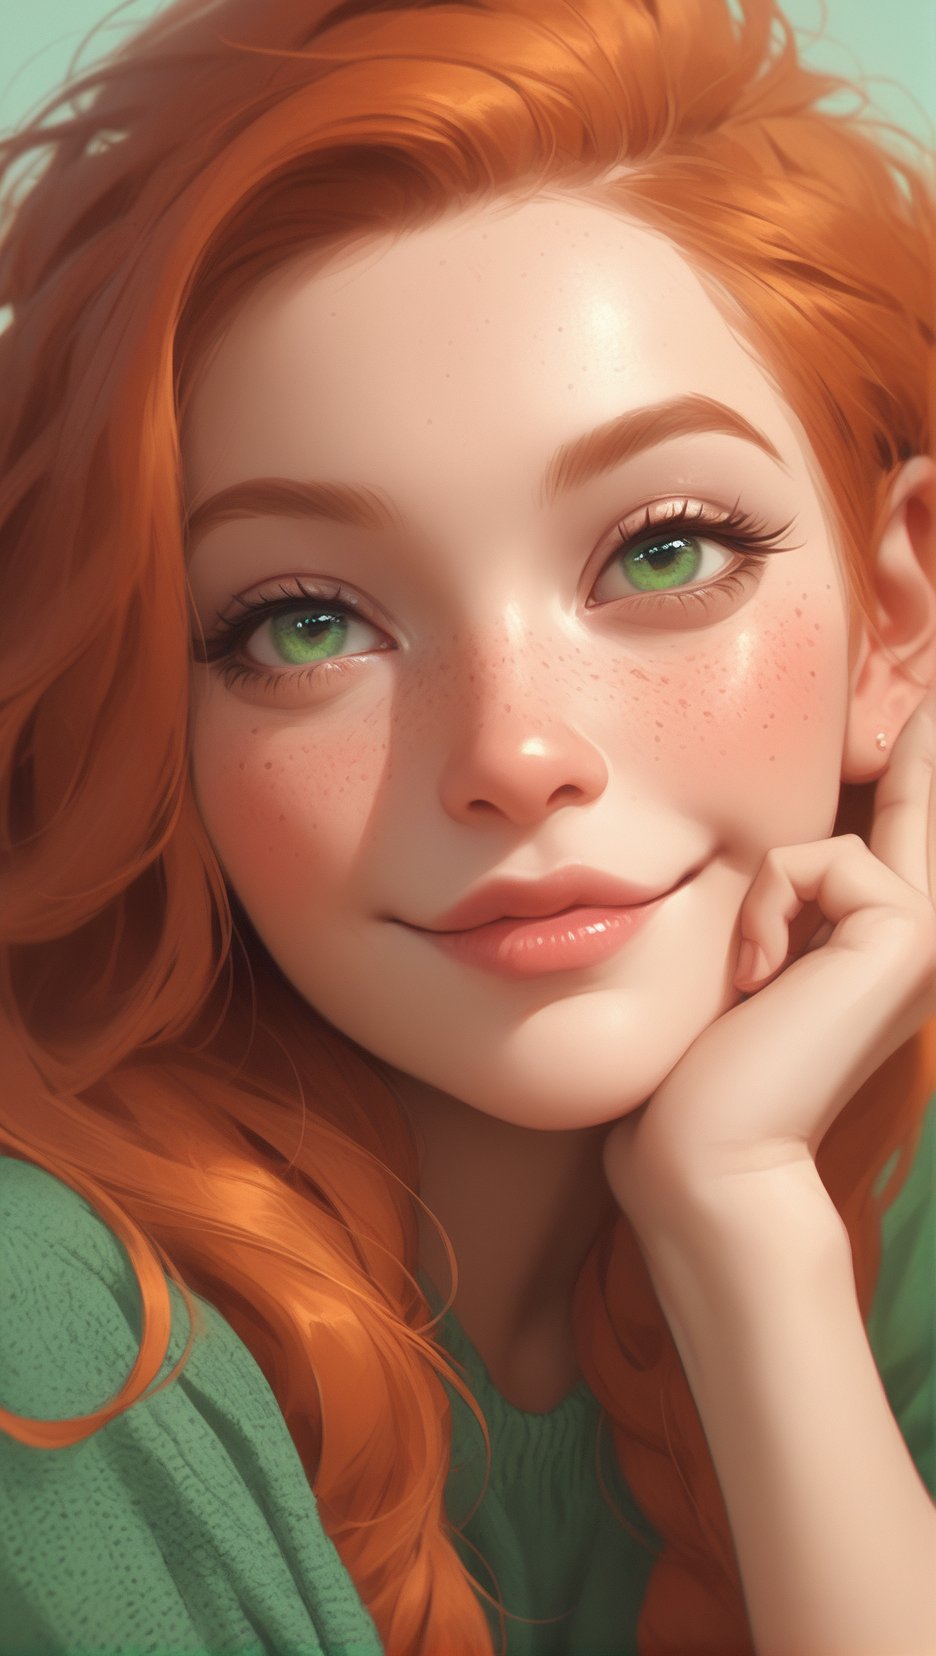 score_9, score_8_up, score_7_up, rating_questionable, girl, freckles, extremely attractive, adorable, cute, extremely pale skin, orange hair, green eyes, light directed at face, light illuminating face, 8k, redhead, lips parted, lewd eyes 